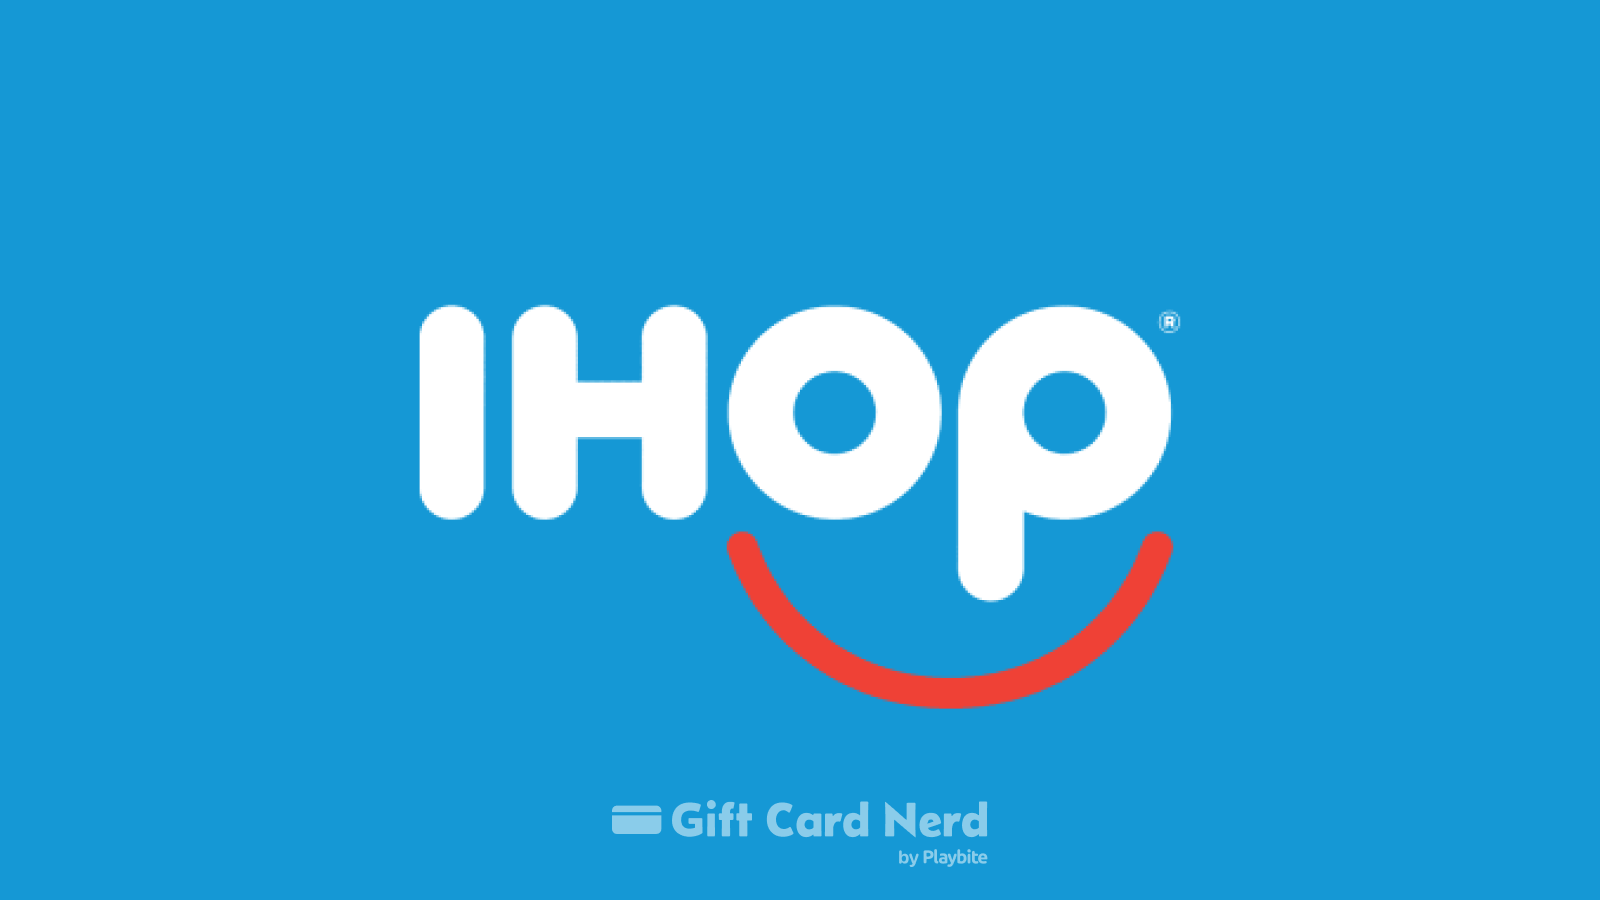 Can I Use an IHOP Gift Card on the Google Play Store?